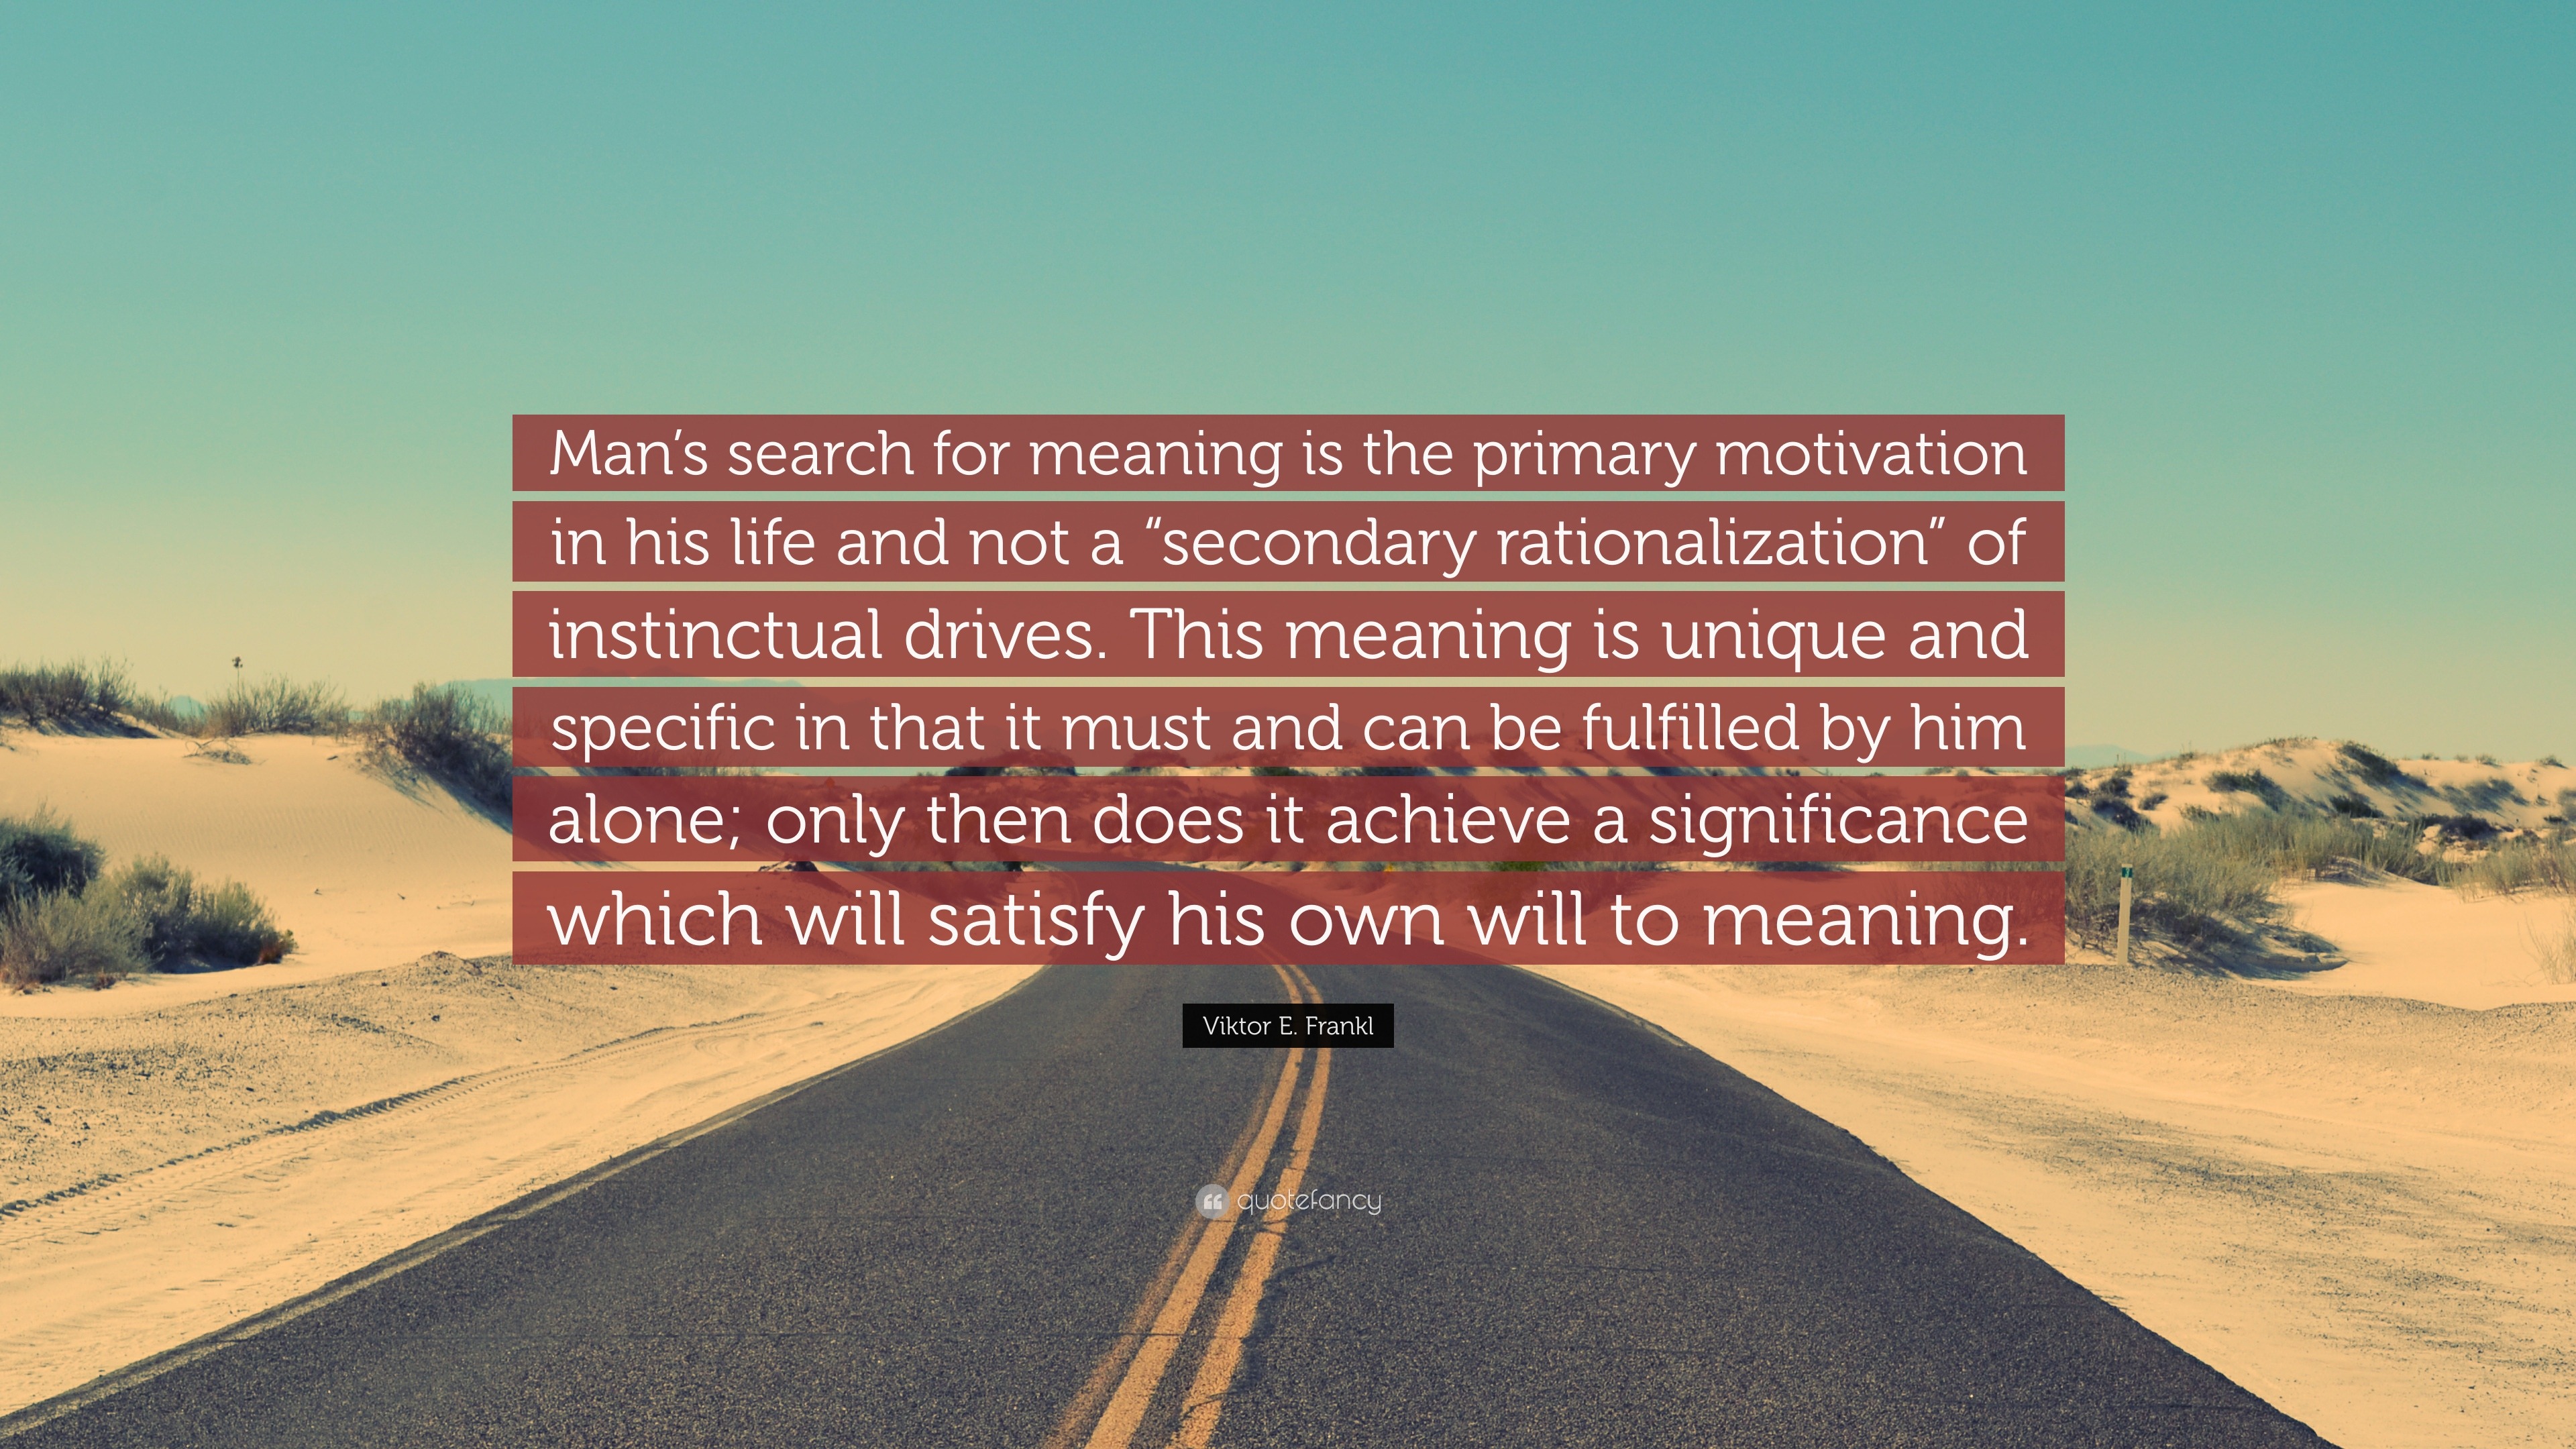 Viktor E Frankl Quote “Man s search for meaning is the primary motivation in